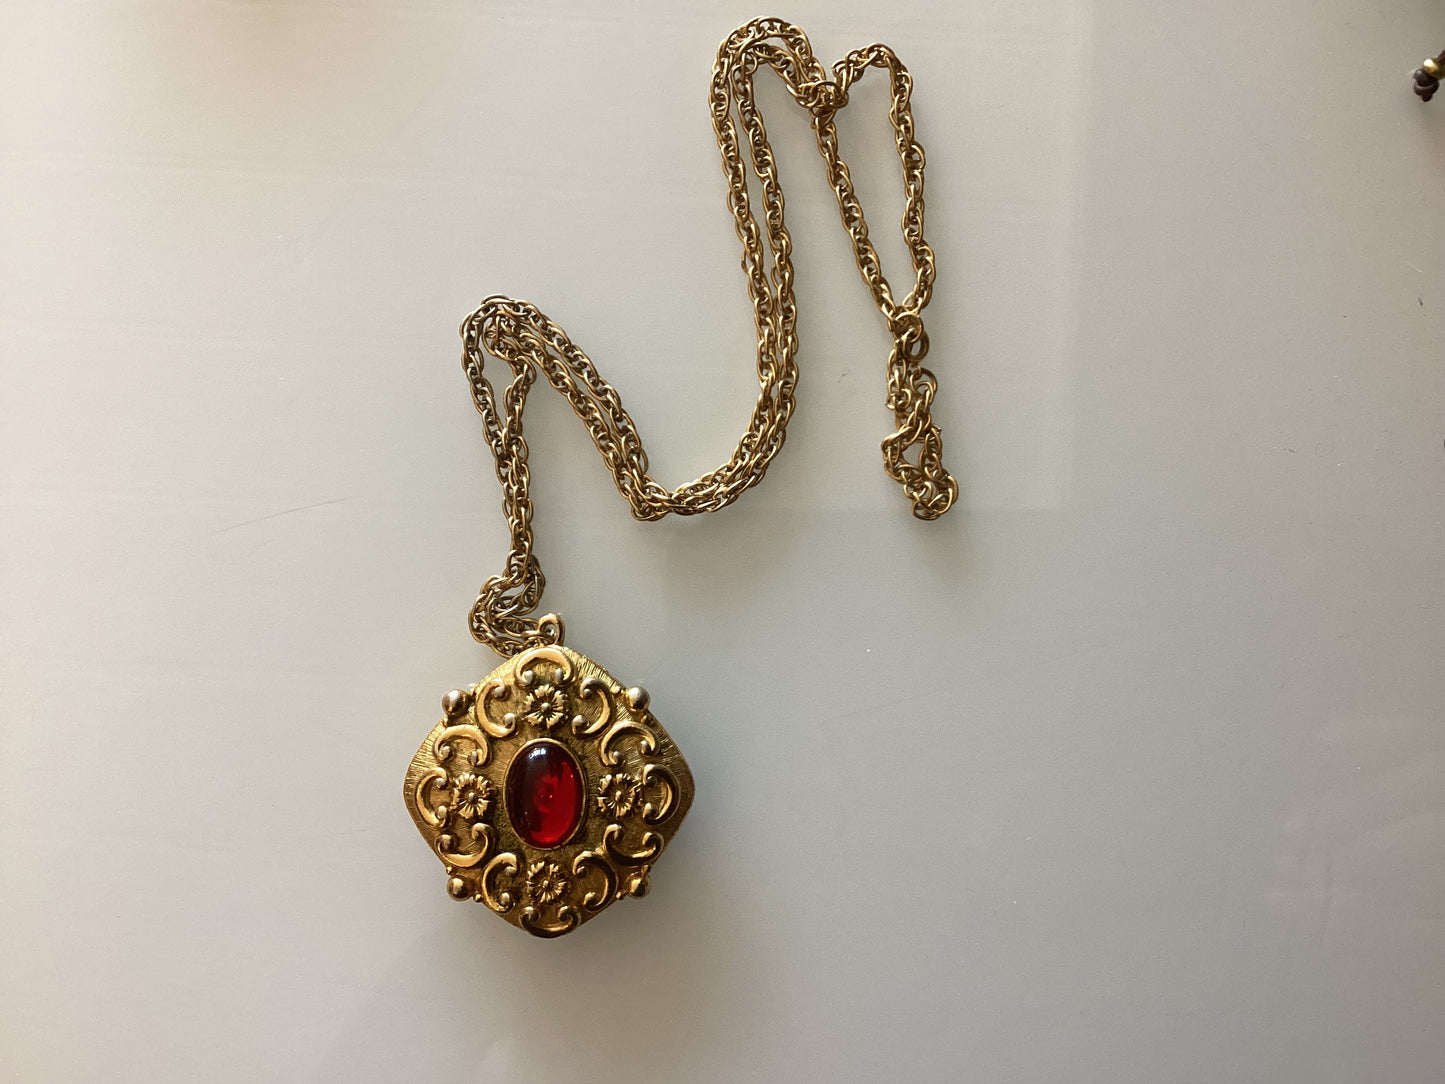 Vintage stunning fragrance pendant. Gold tone with red stone